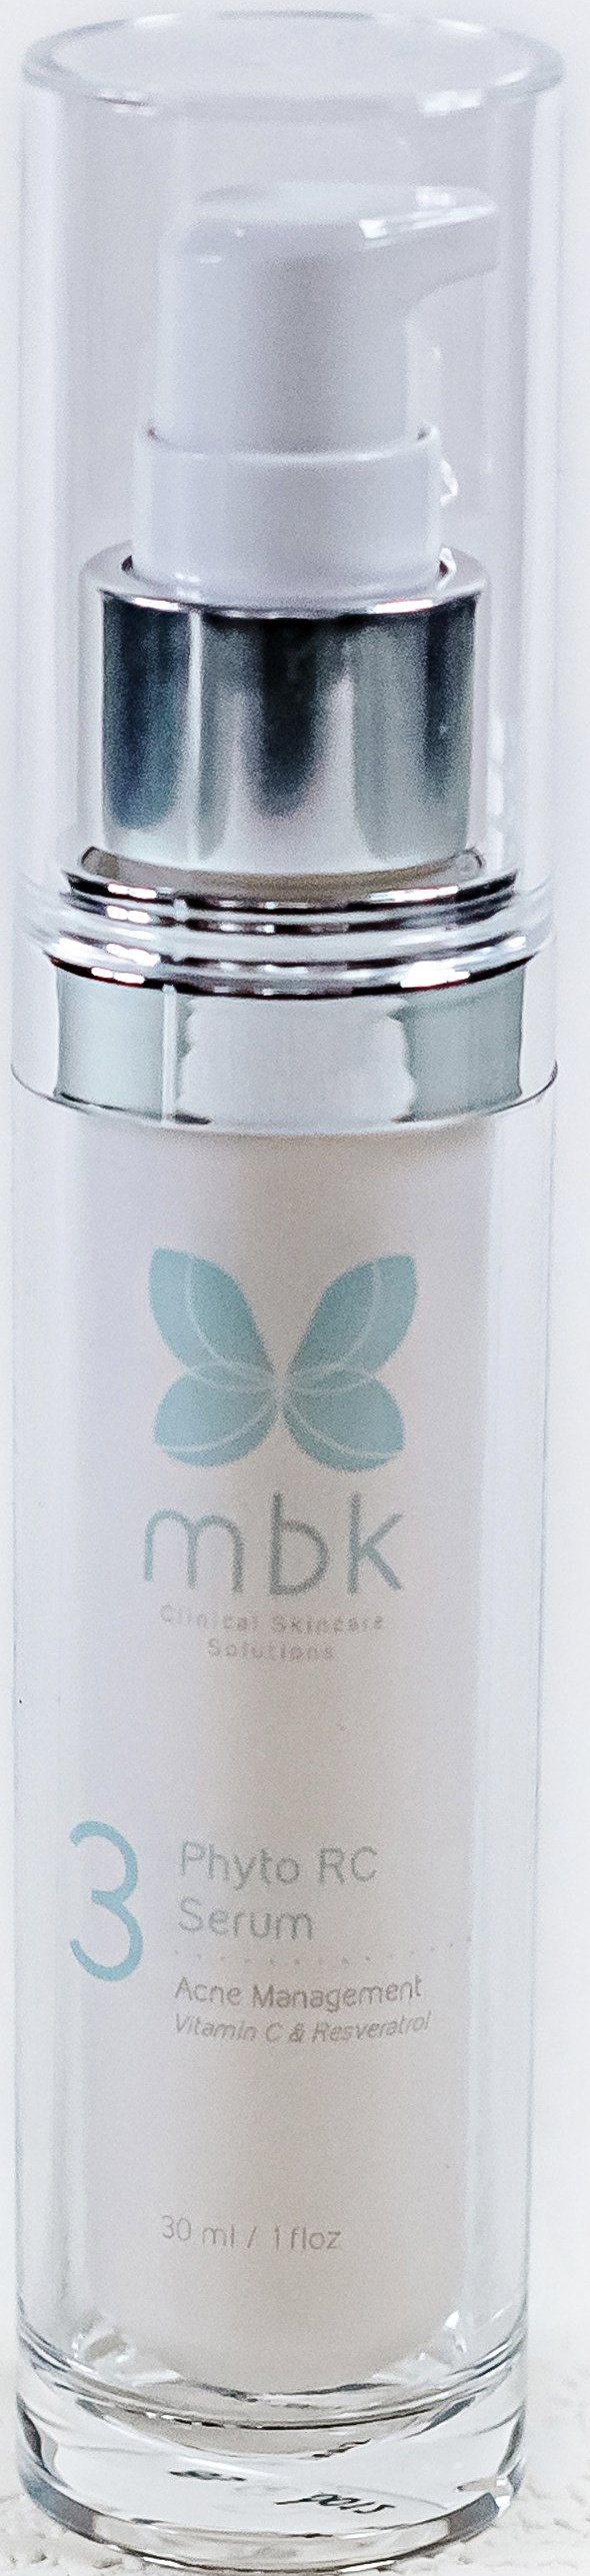 MBK Clinical Skincare Solutions Phyto RC Serum